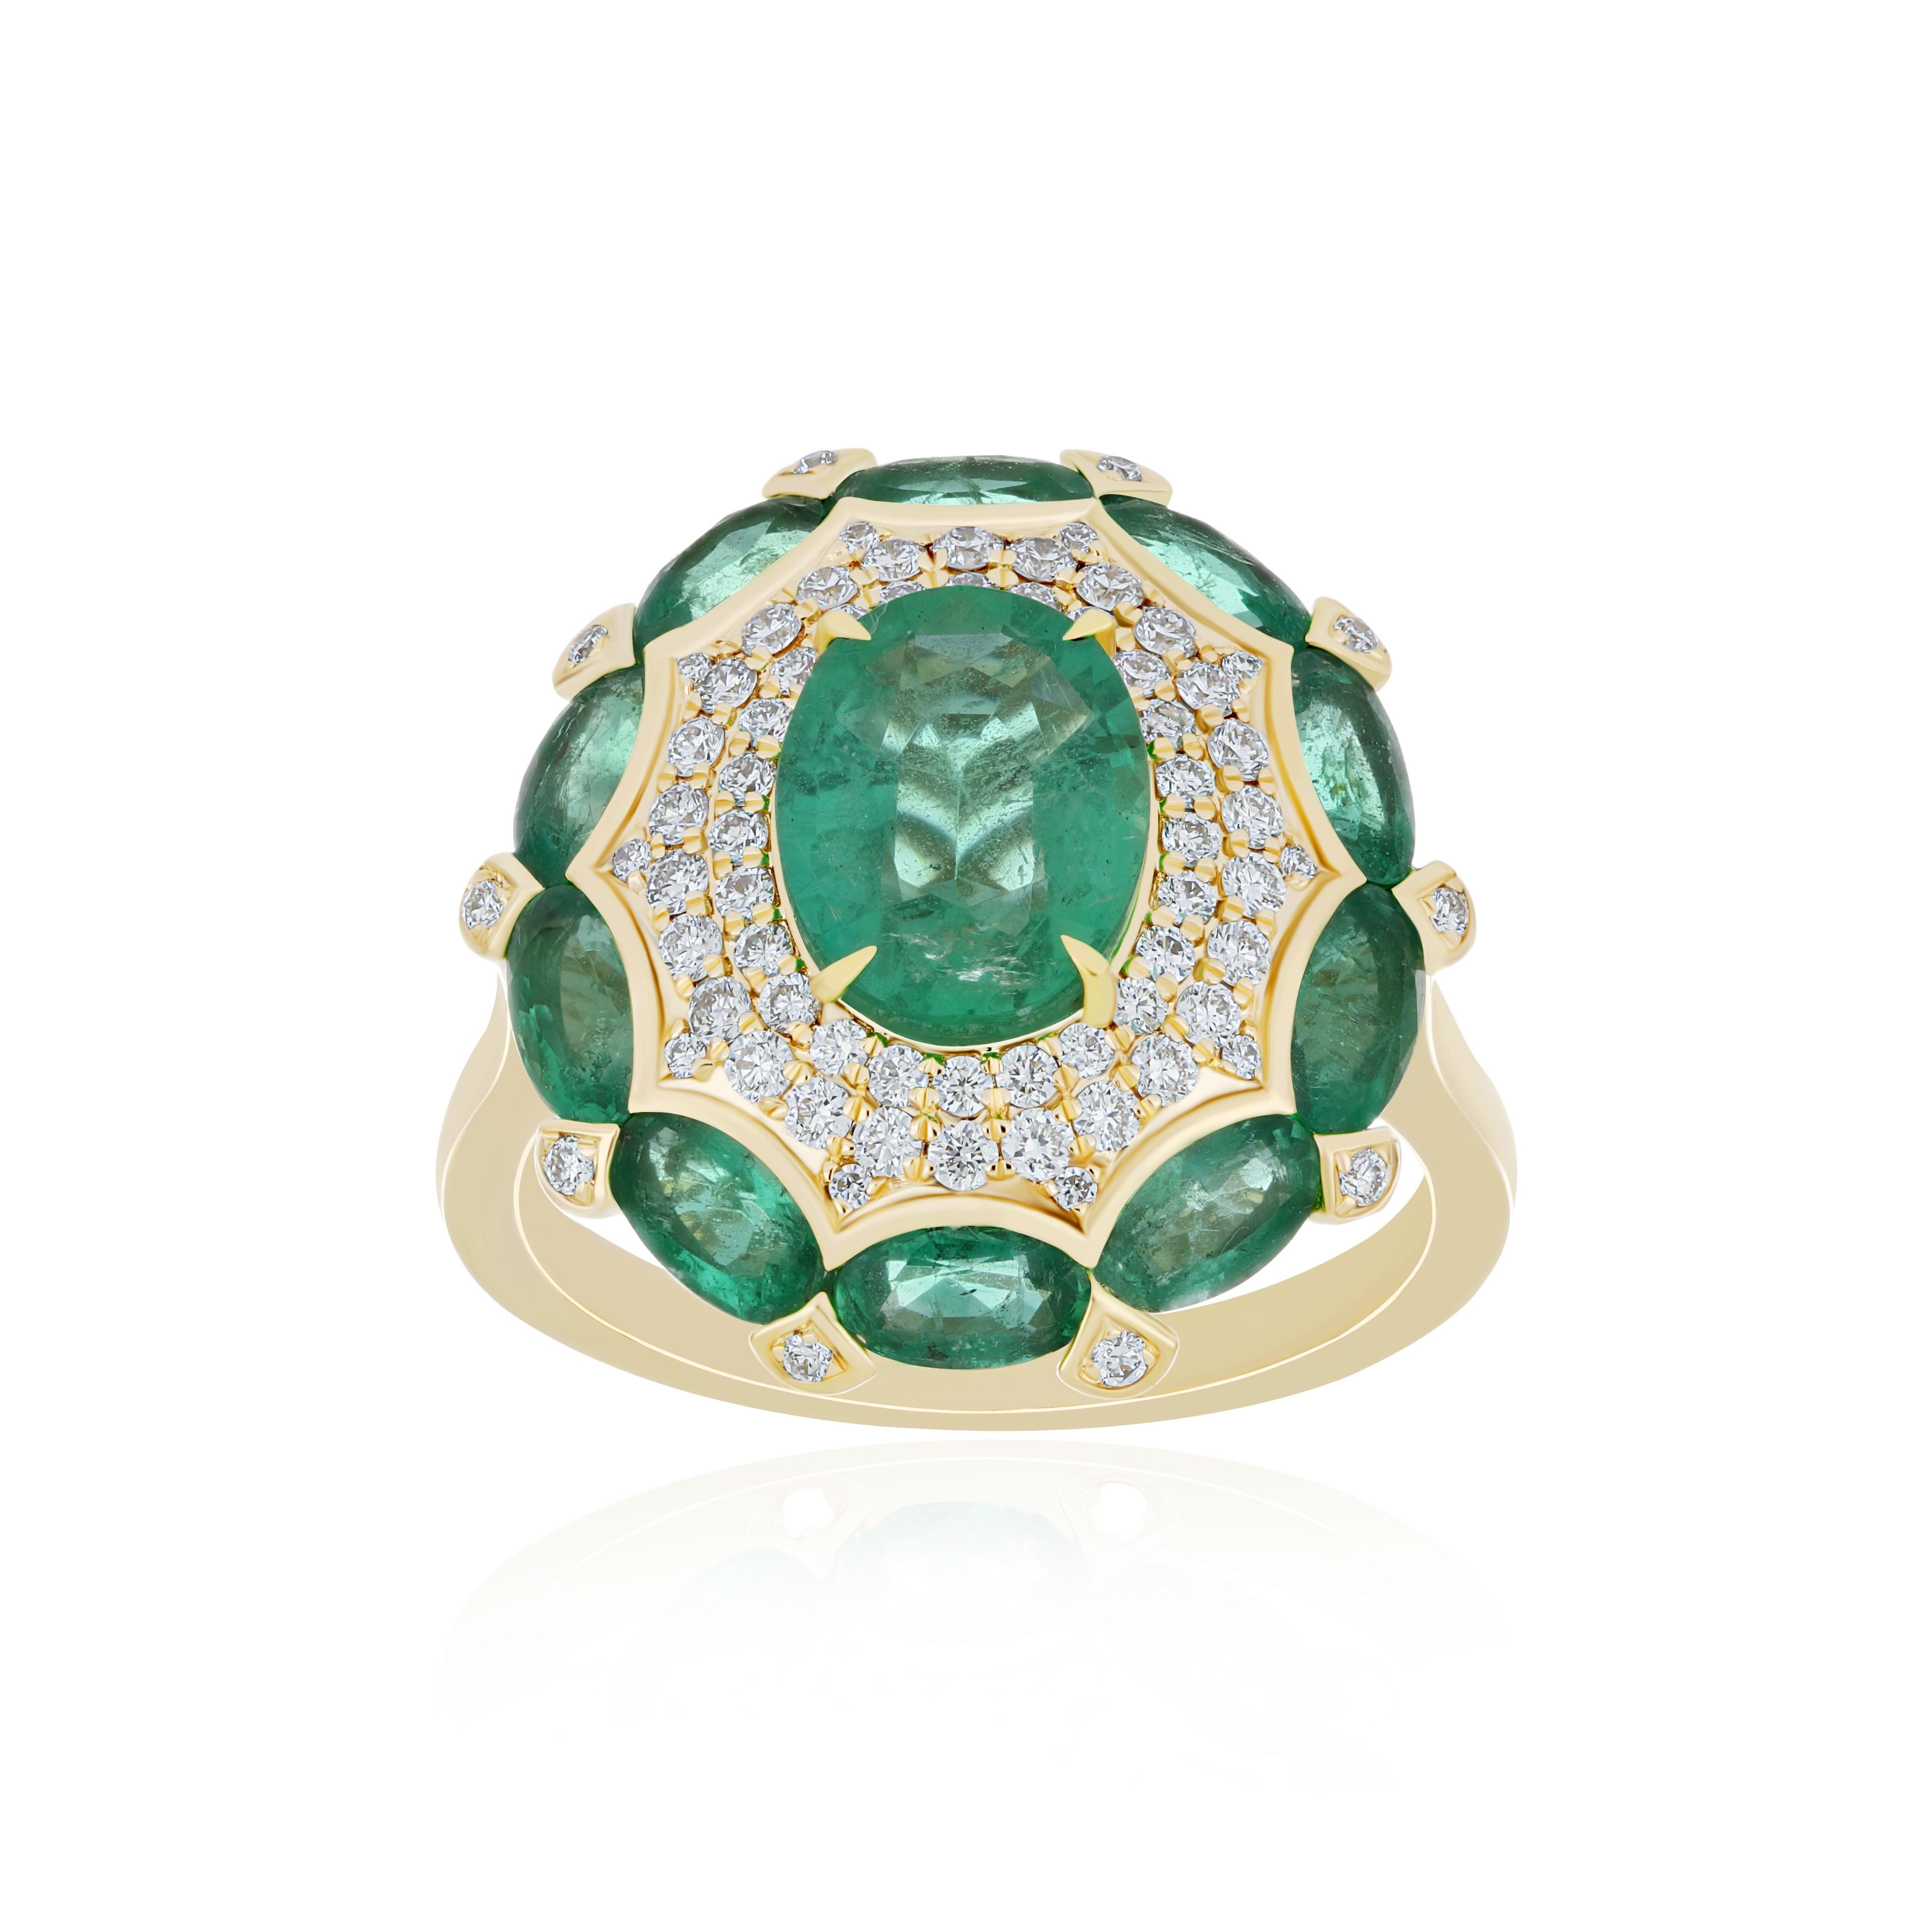 Elegant and Exquisitely detailed Yellow Gold Ring, with 3.8 Cts (approx.) Oval Brilliant Cut Emerald set in the center beautifully accented with Micro pave set Diamond and Emerald, Daimond weighing approx. 0.45 CT's (approx.). total carat weight to